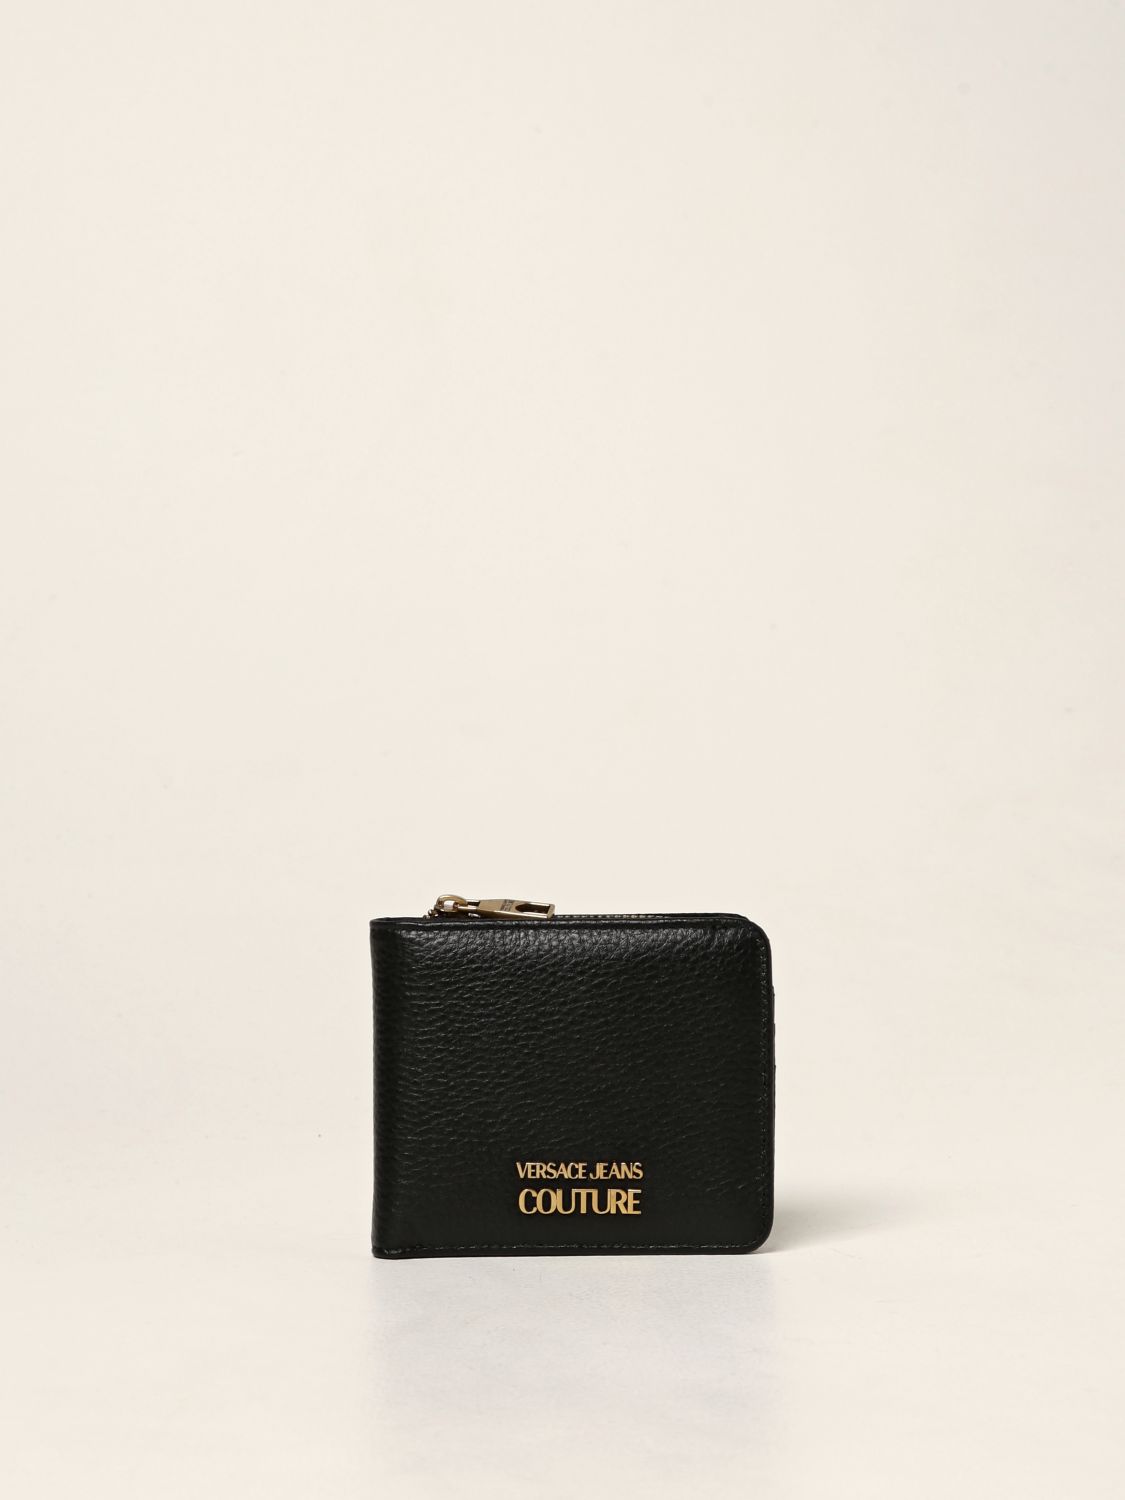 Versace Jeans Couture wallet in textured leather